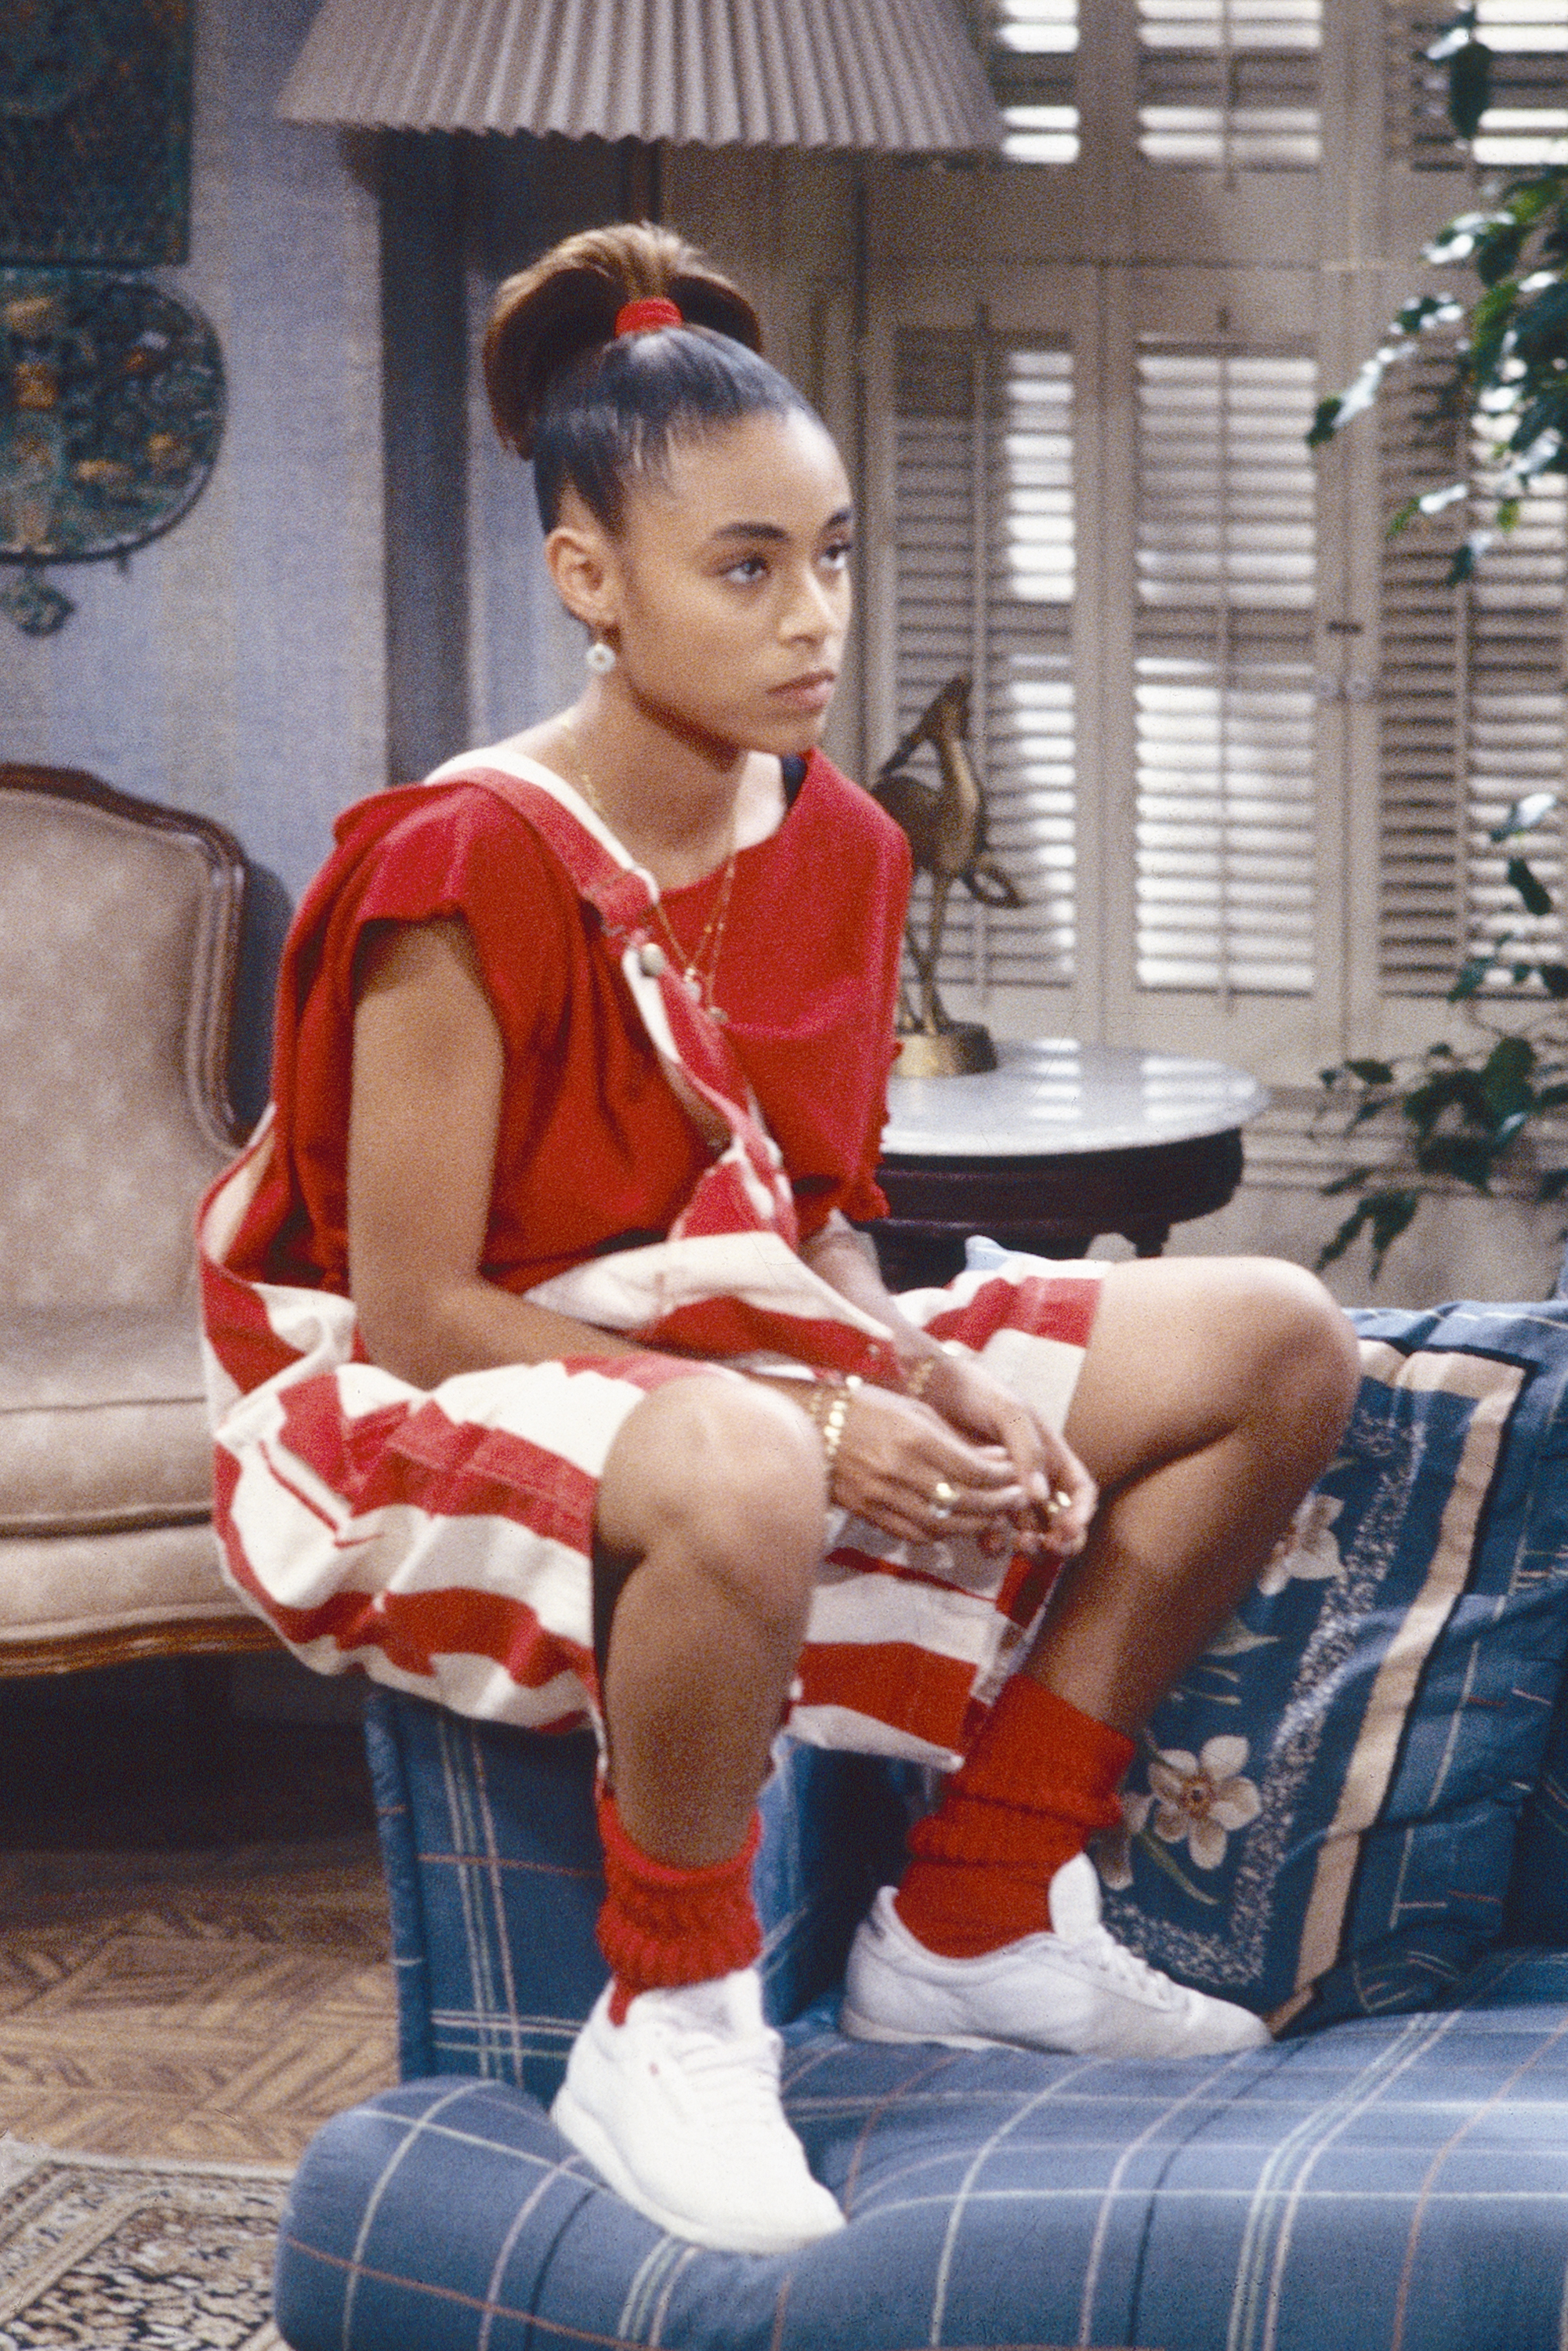 Episode 24 of "A Different World" season 5 | Source: Getty Images